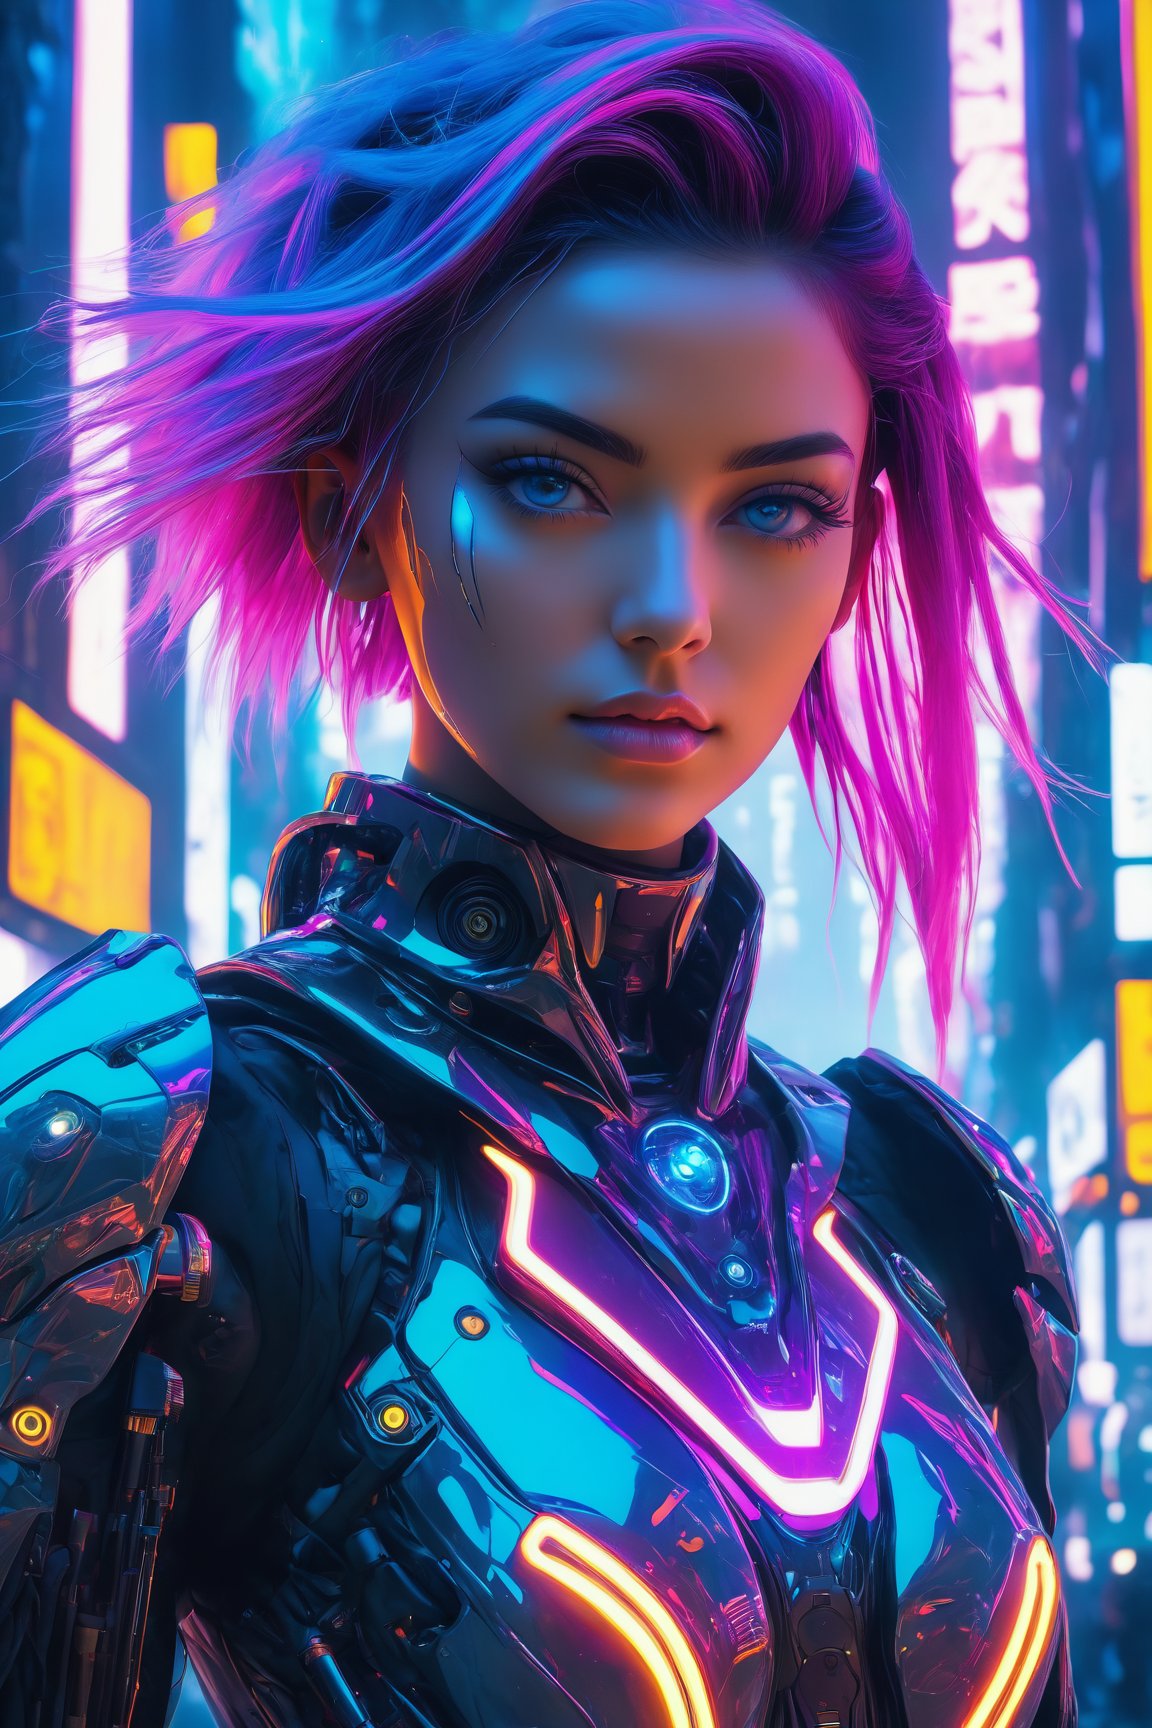 (best quality,4k,8k,highres,masterpiece:1.2),ultra-detailed,(realistic,photorealistic,photo-realistic:1.37),cyborg,1girl,neon hair,niji style,futuristic,electric atmosphere,vibrant colors,glowing lights,metallic reflections,digital enhancements,energetic pose,eye-catching,artificial intelligence,tech-inspired,fluid motion,dynamic composition,sci-fi elements,urban setting,gritty background,dystopian vibes,edgy fashion,cyberpunk aesthetics,holographic effects,retro-futurism,synthetic beauty,neon signs,rich textures,immersive experience,advanced technology,cybernetic enhancements,otherworldly,expressive eyes,mechanical details,modern art,unique perspective,experimental,cosmic energy,nanoscale implants,ethereal presence,augmented reality,creative expression,limitless possibilities